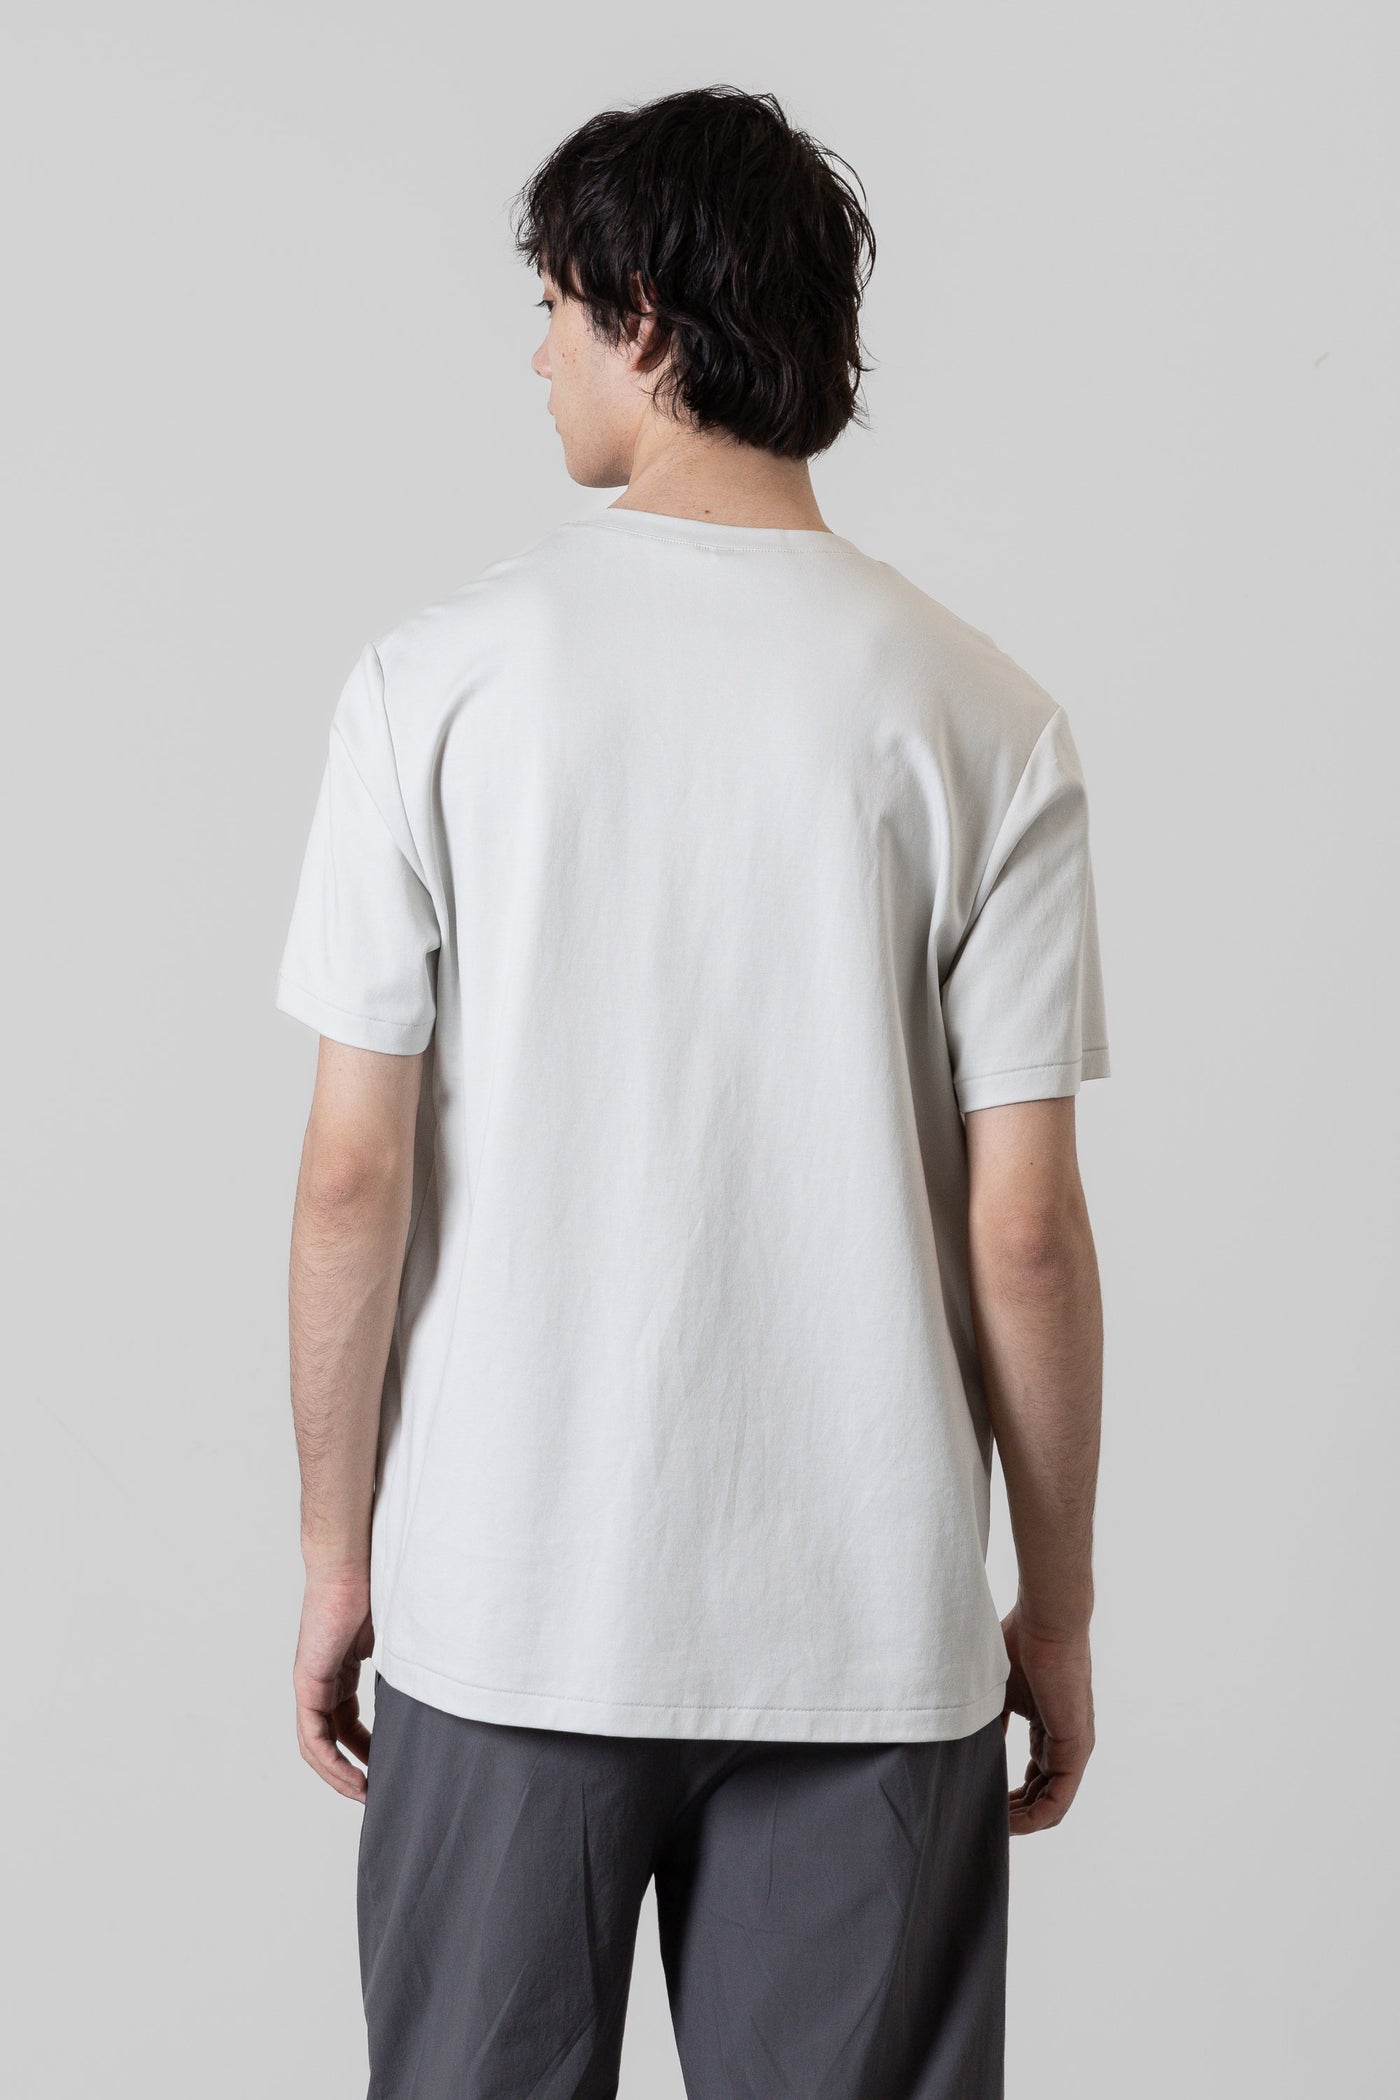 Released in February AJ41-047 Cotton double face slim fit T-shirt S/S